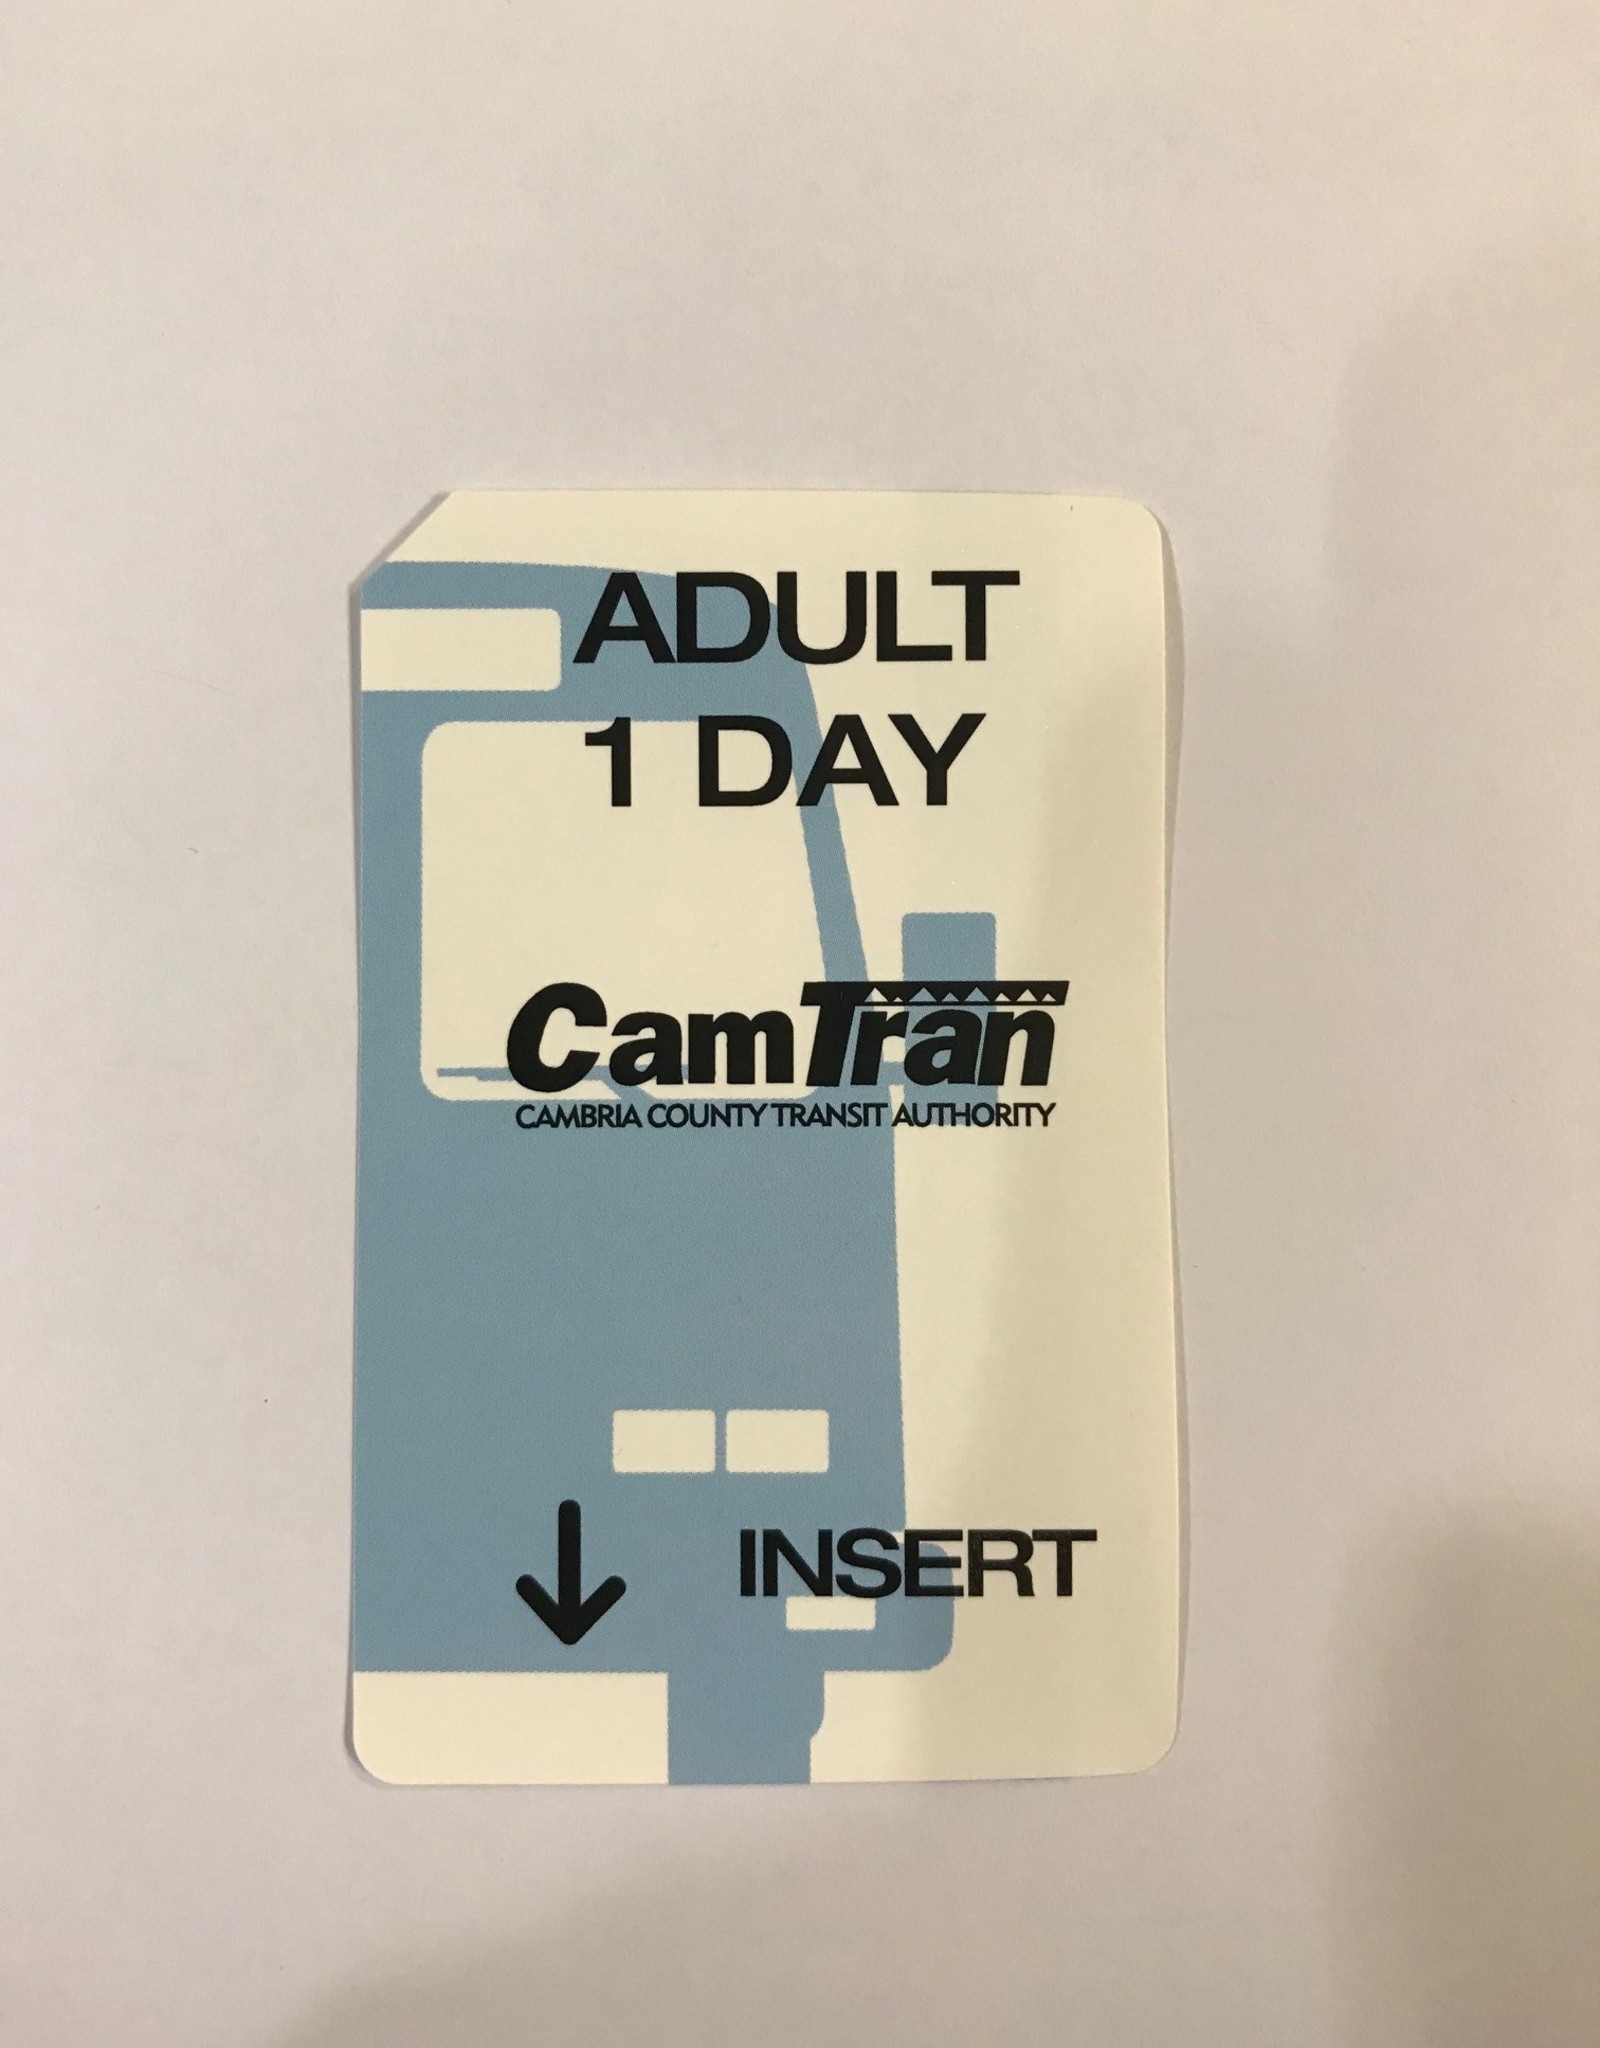 Bus Pass - Adult 1 Day